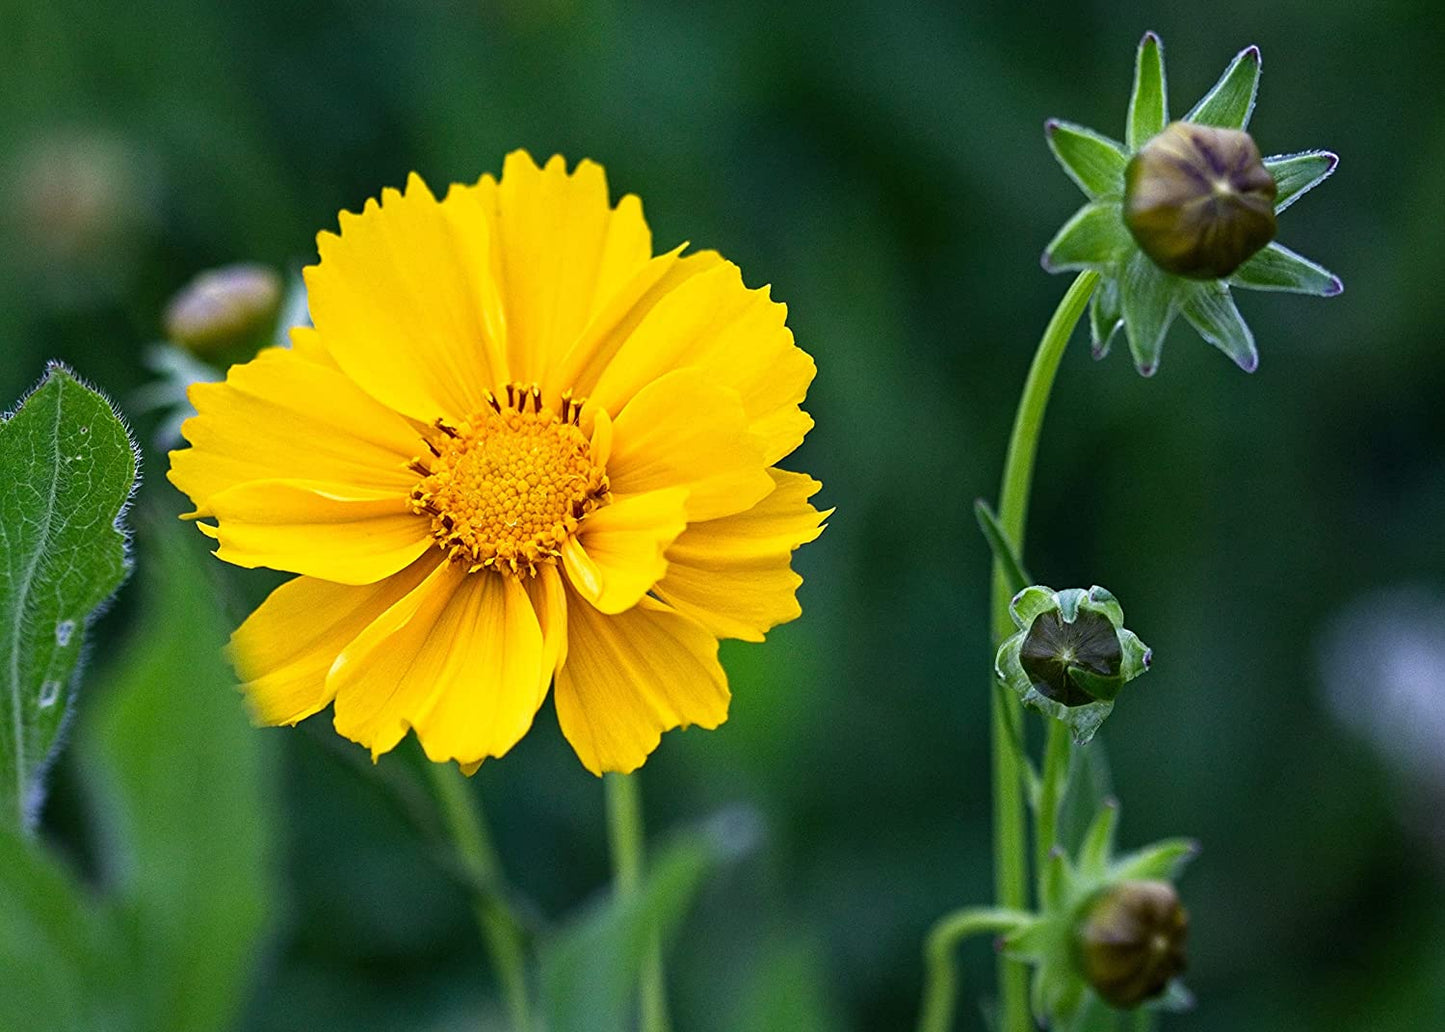 Hundredfold Dwarf Lance-leaved Coreopsis 200 Native Wildflower Flower Seeds - Coreopsis lanceolata Sand Coreopsis, Lance Leaf Tickseed, Showy Yellow Blooms, Attract Bees and Butterflies